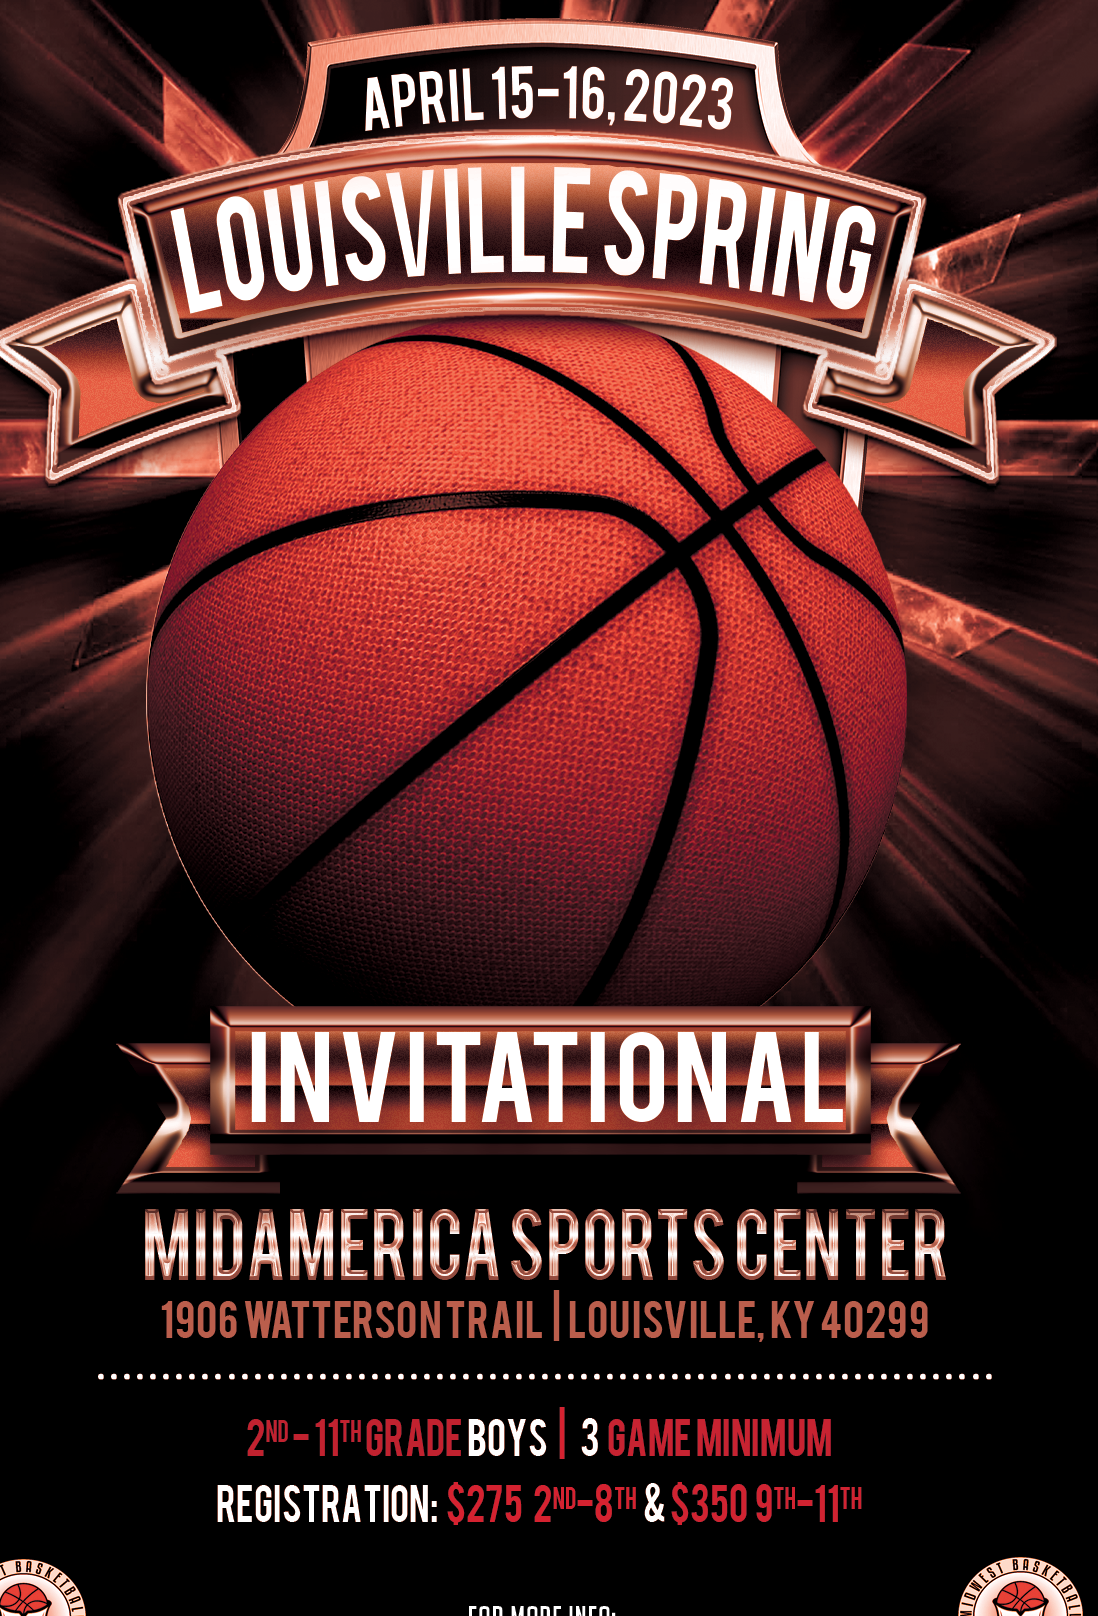 <span style="color: #ff0000;"><strong><span style="font-size: 14pt;">Louisville Spring Invitational<br />April 15-16, 2023<br /></span><a href="http://www.midwestbballtournaments.com/ViewEvent.aspx?EID=1026"><span style="font-size: 14pt;">Click Here for Details</span> </a></strong></span>